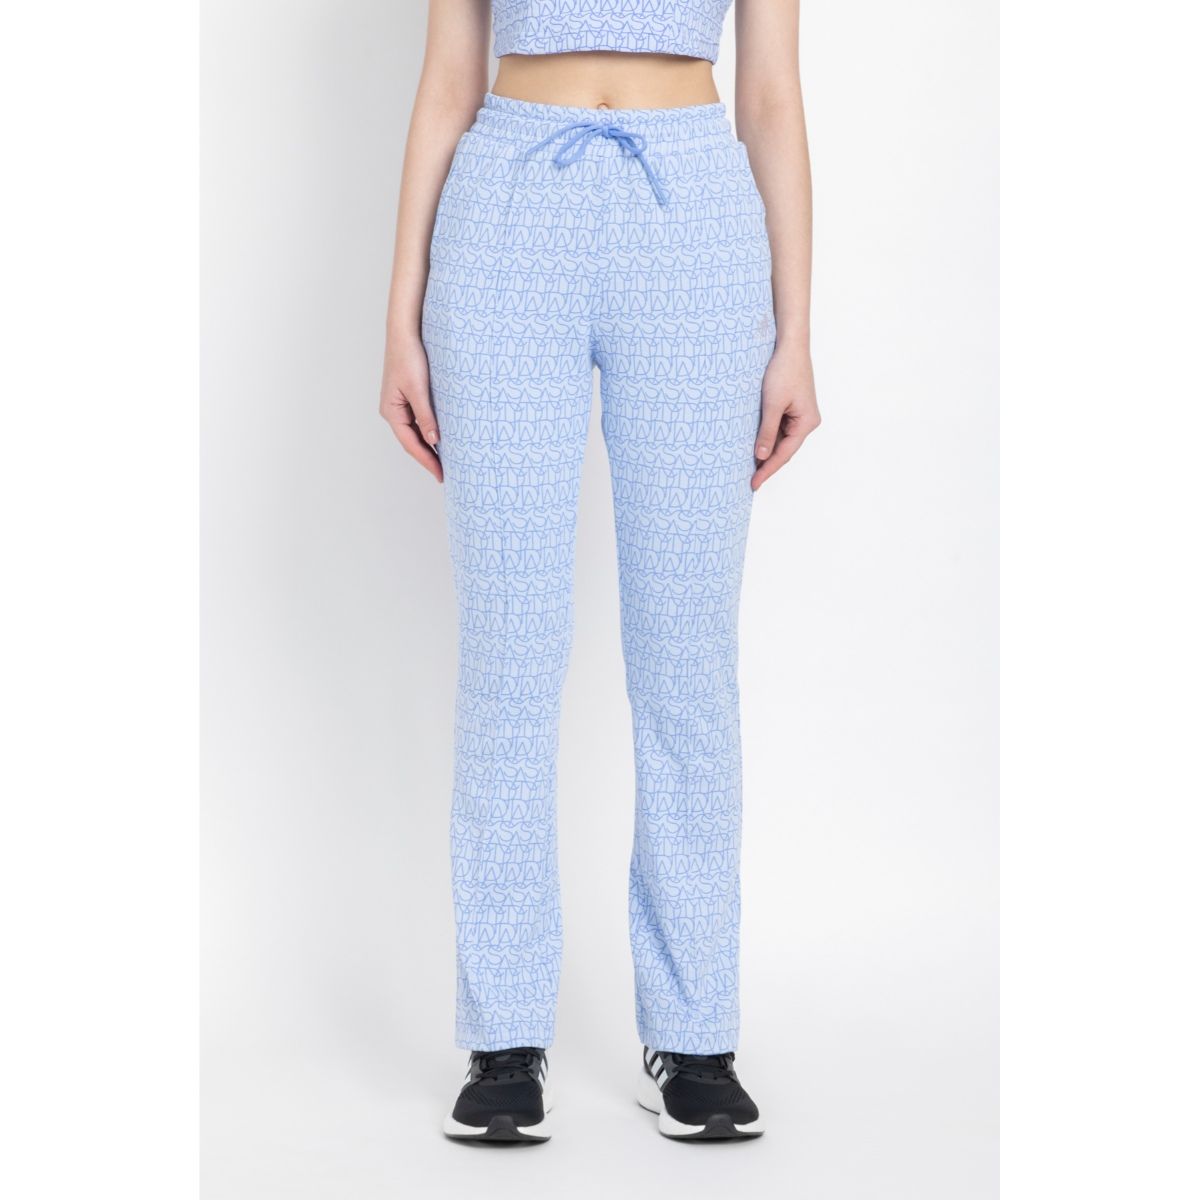 adidas Women Bluv Q2 Flarept Blue Sports Track Pant Buy adidas Women Bluv  Q2 Flarept Blue Sports Track Pant Online at Best Price in India  Nykaa